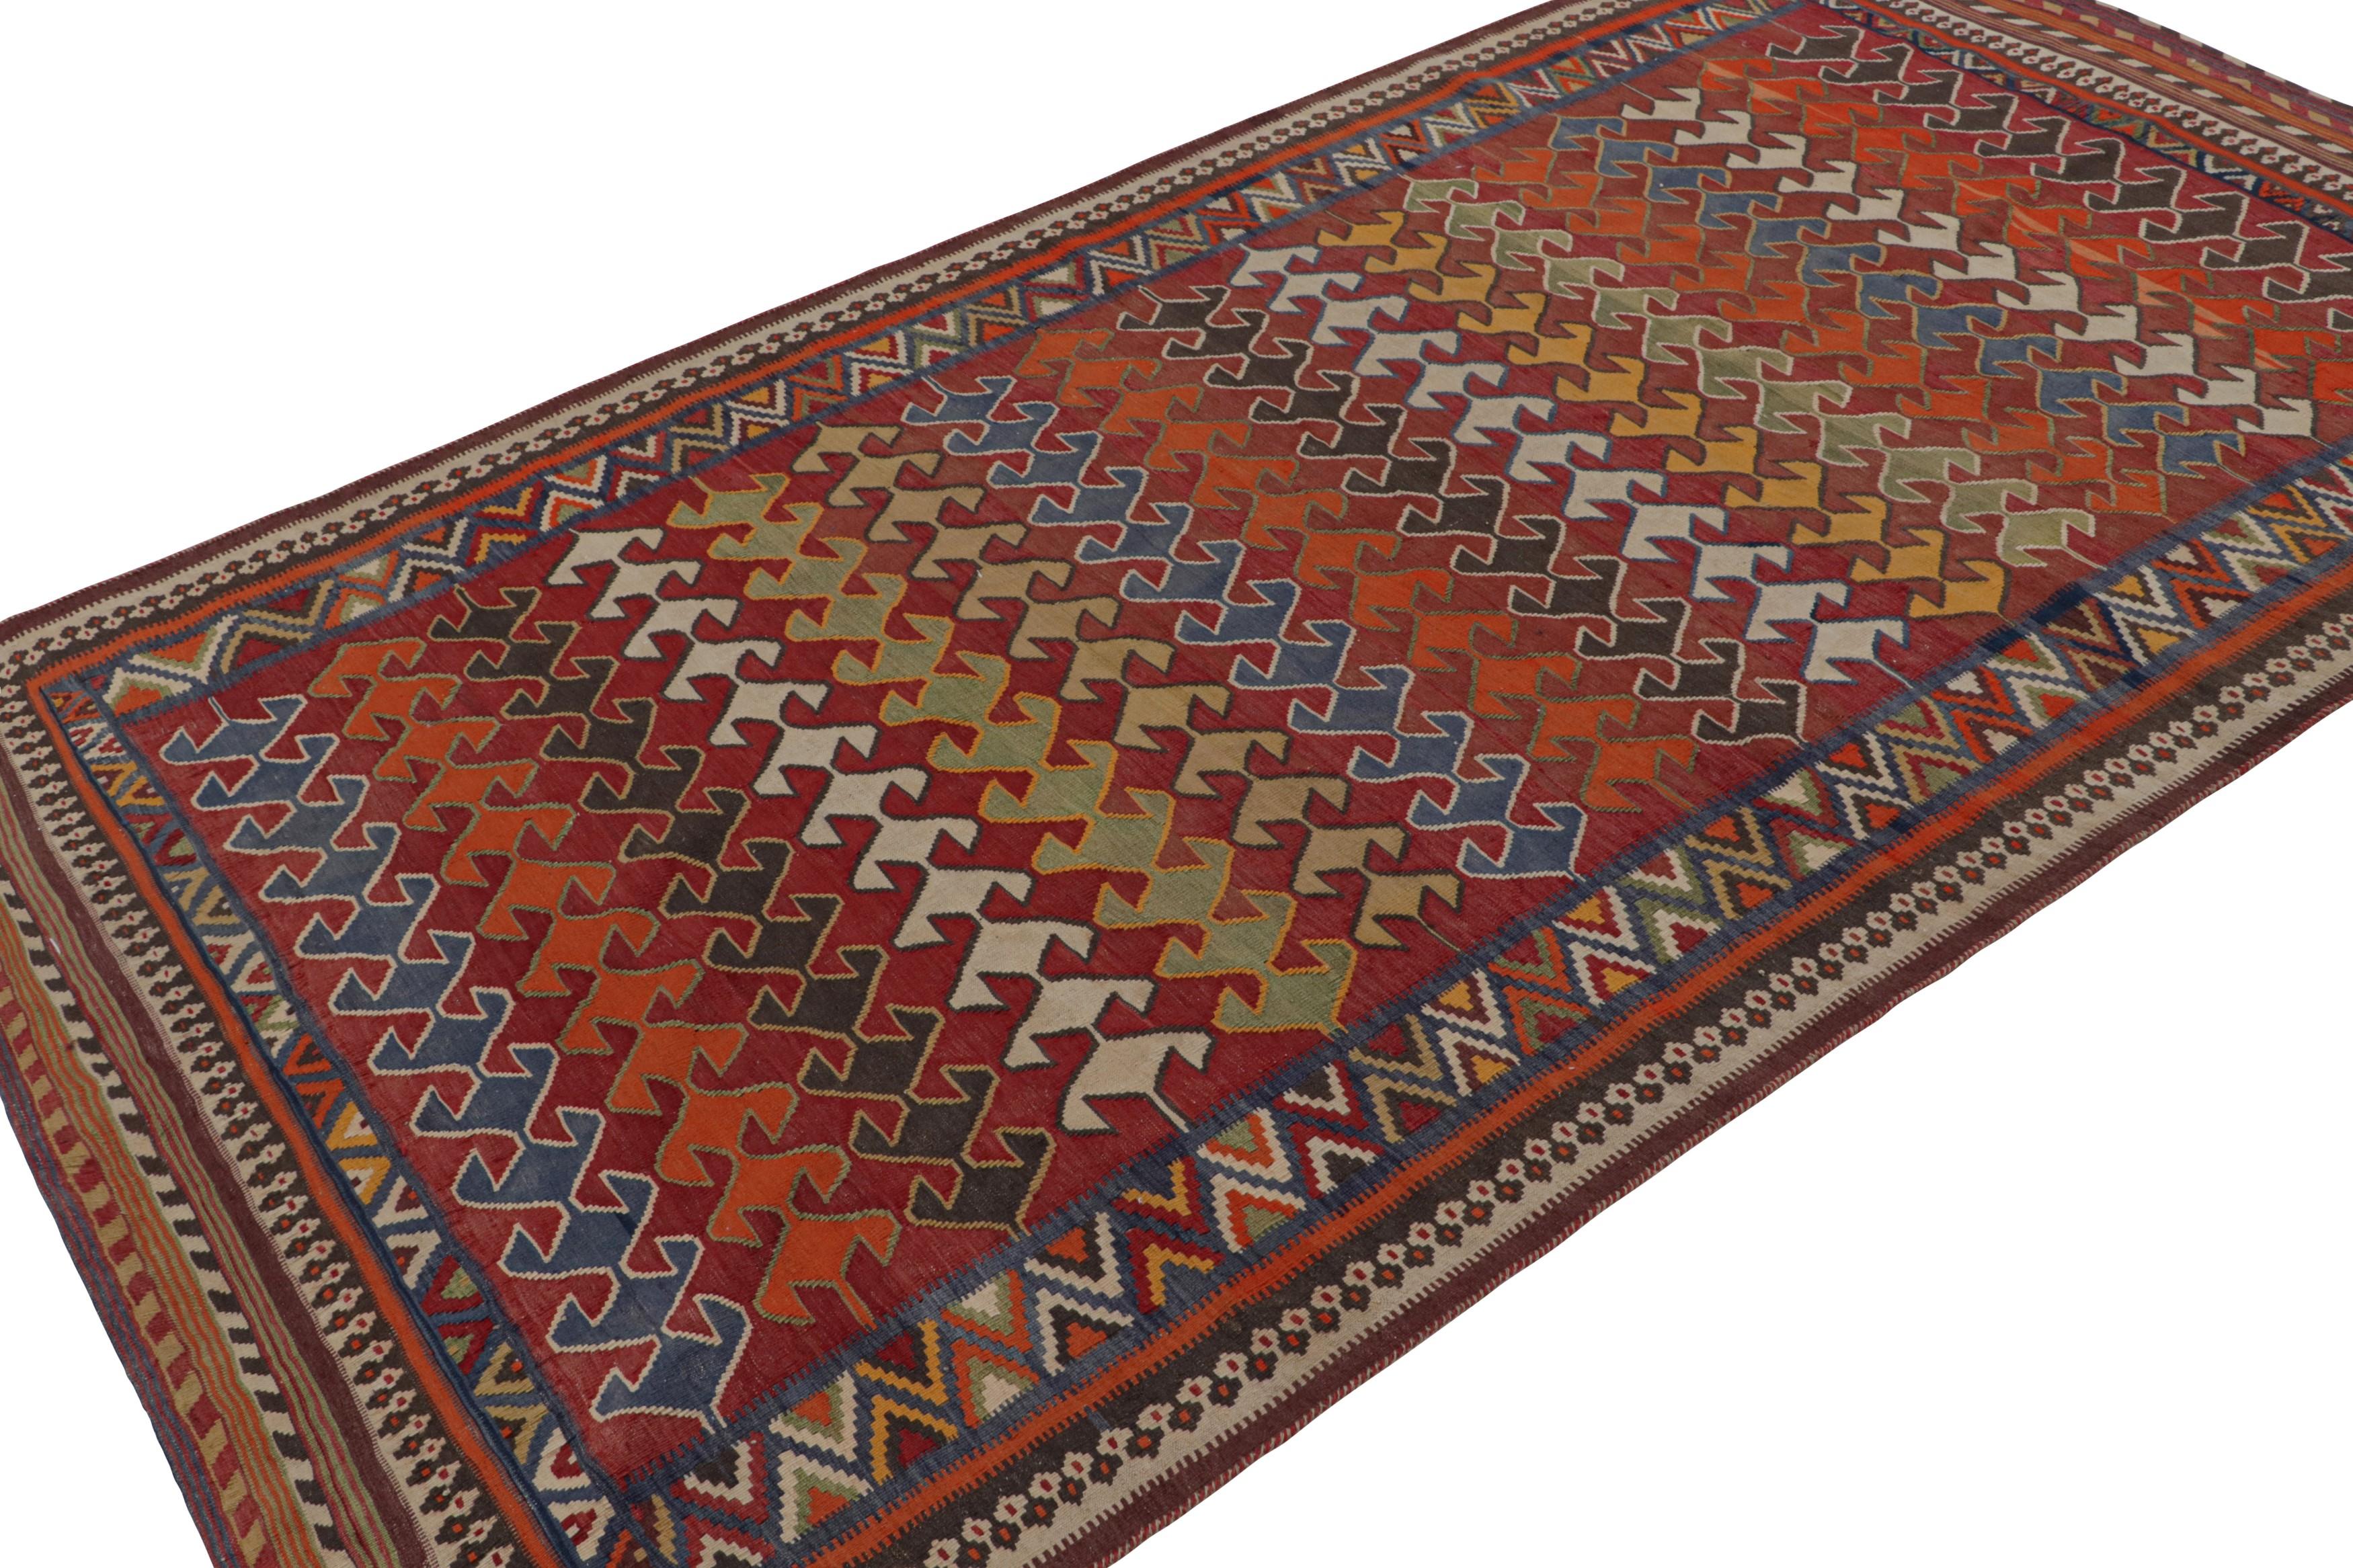 Handwoven in wool, circa 1950-1960, this 5x9 Afghani tribal Kilim rug, featuring vibrant colors and geometric patterns over a red field, is an exciting addition to the Rug & Kilim Collection.   

On the Design: 

A special kilim rug in the Rug &